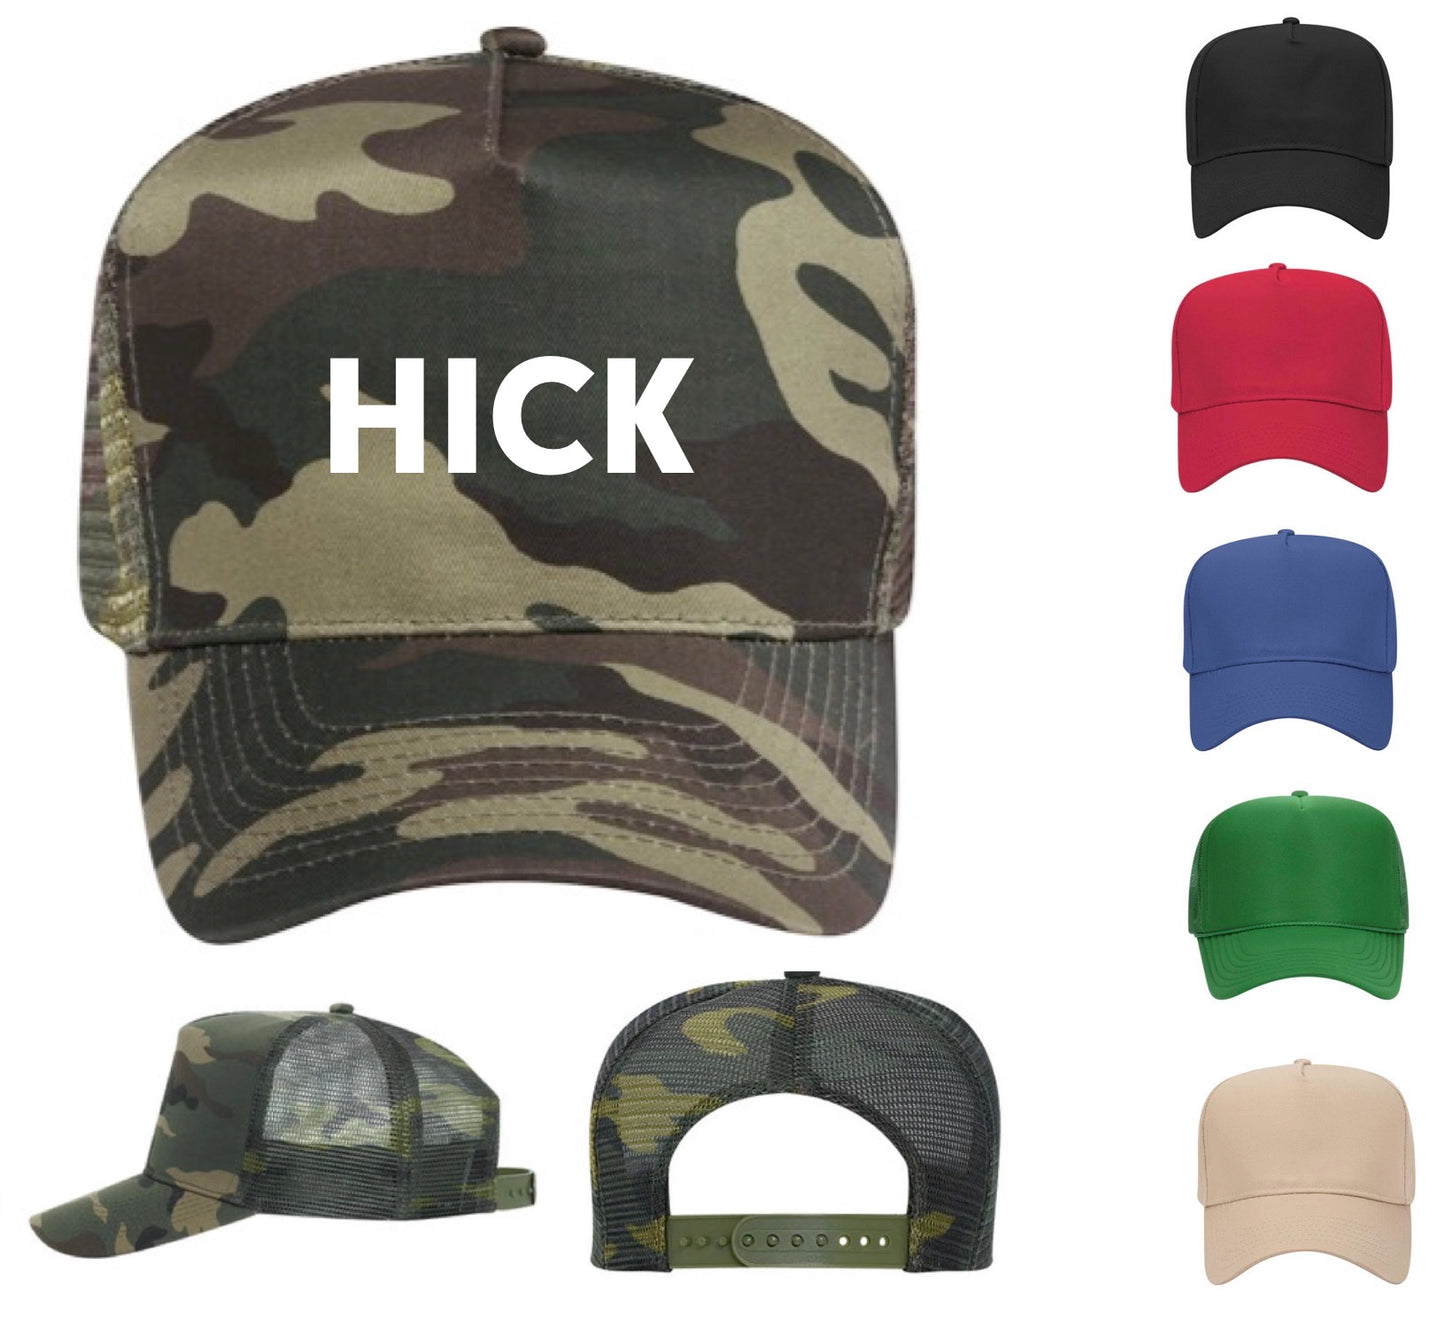 HICK Hat (FREE Shipping)